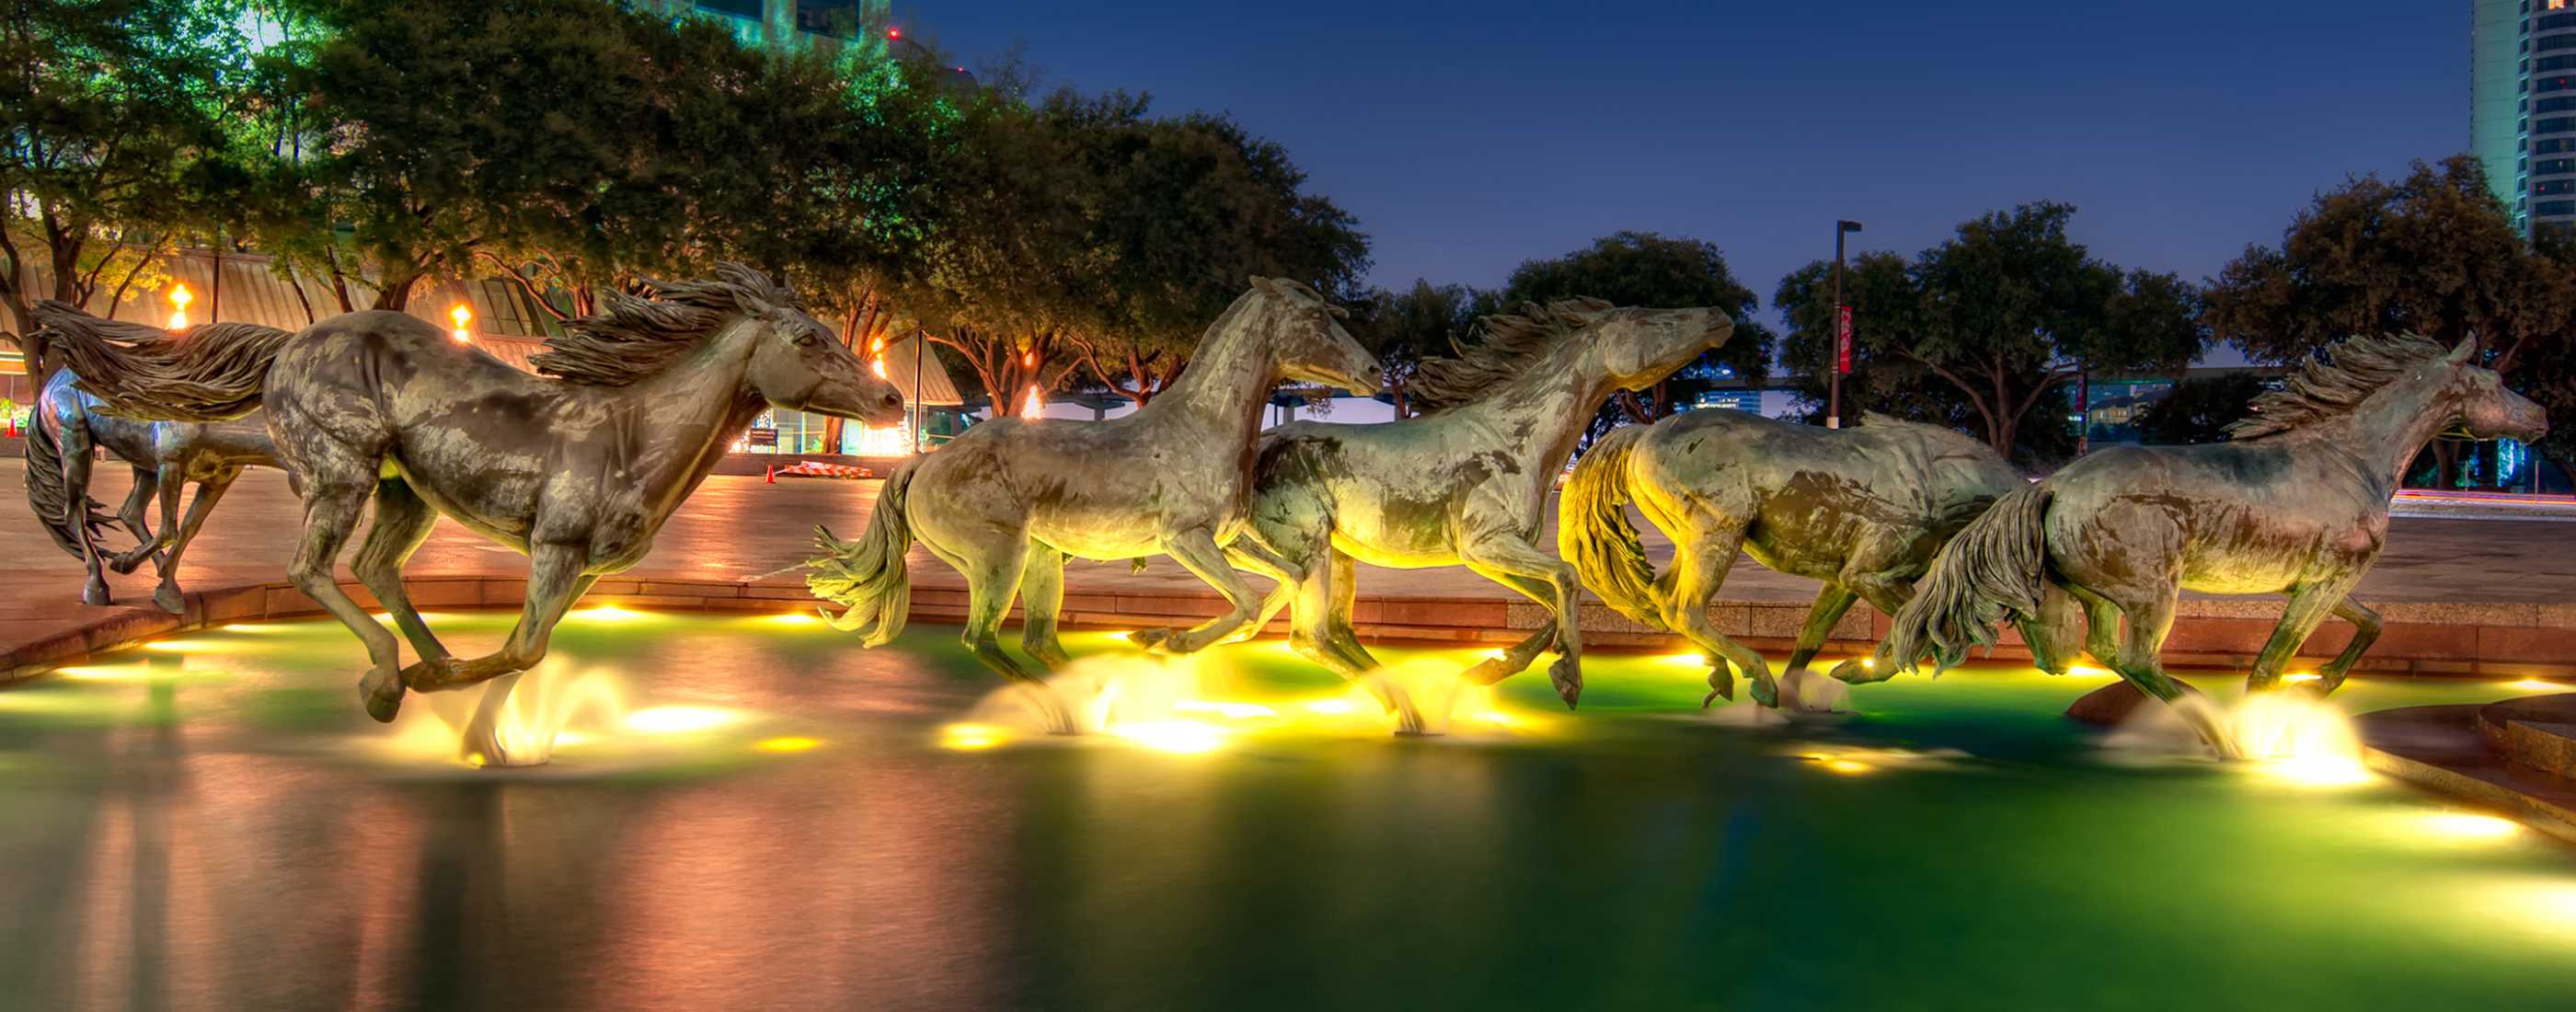 Mustangs at night beauty shot c85950ef 388a 403a a76e d5ae766d6ca7